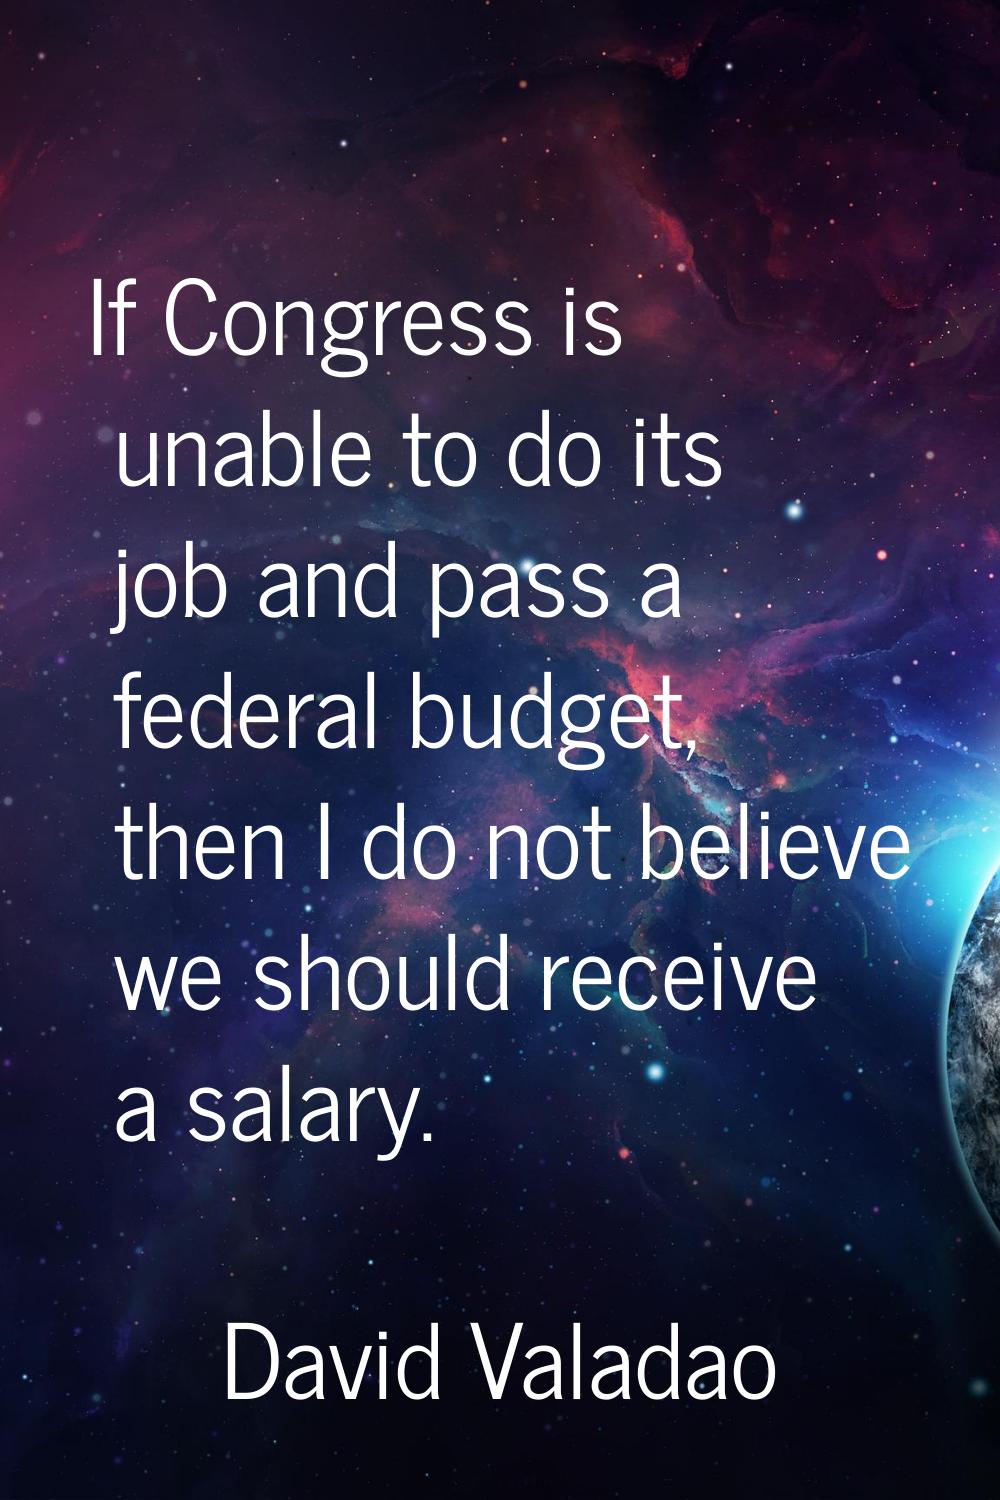 If Congress is unable to do its job and pass a federal budget, then I do not believe we should rece